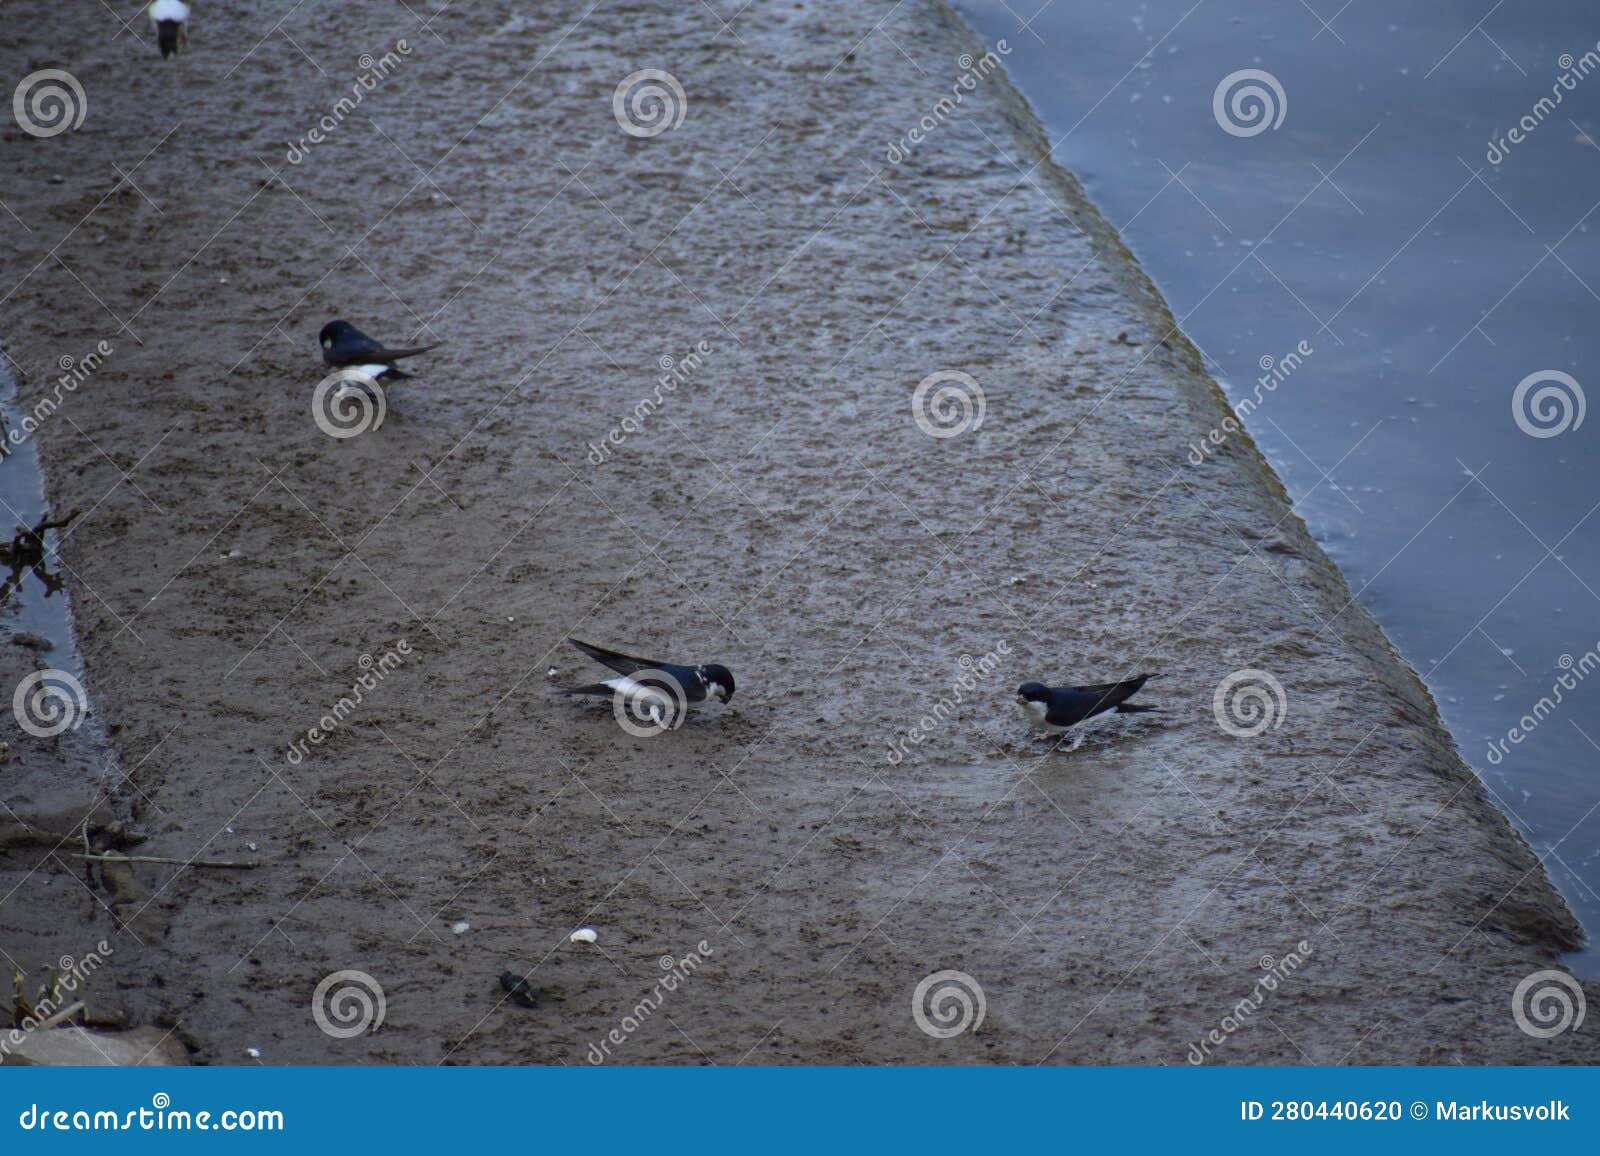 three swallows collecting mud for the nests